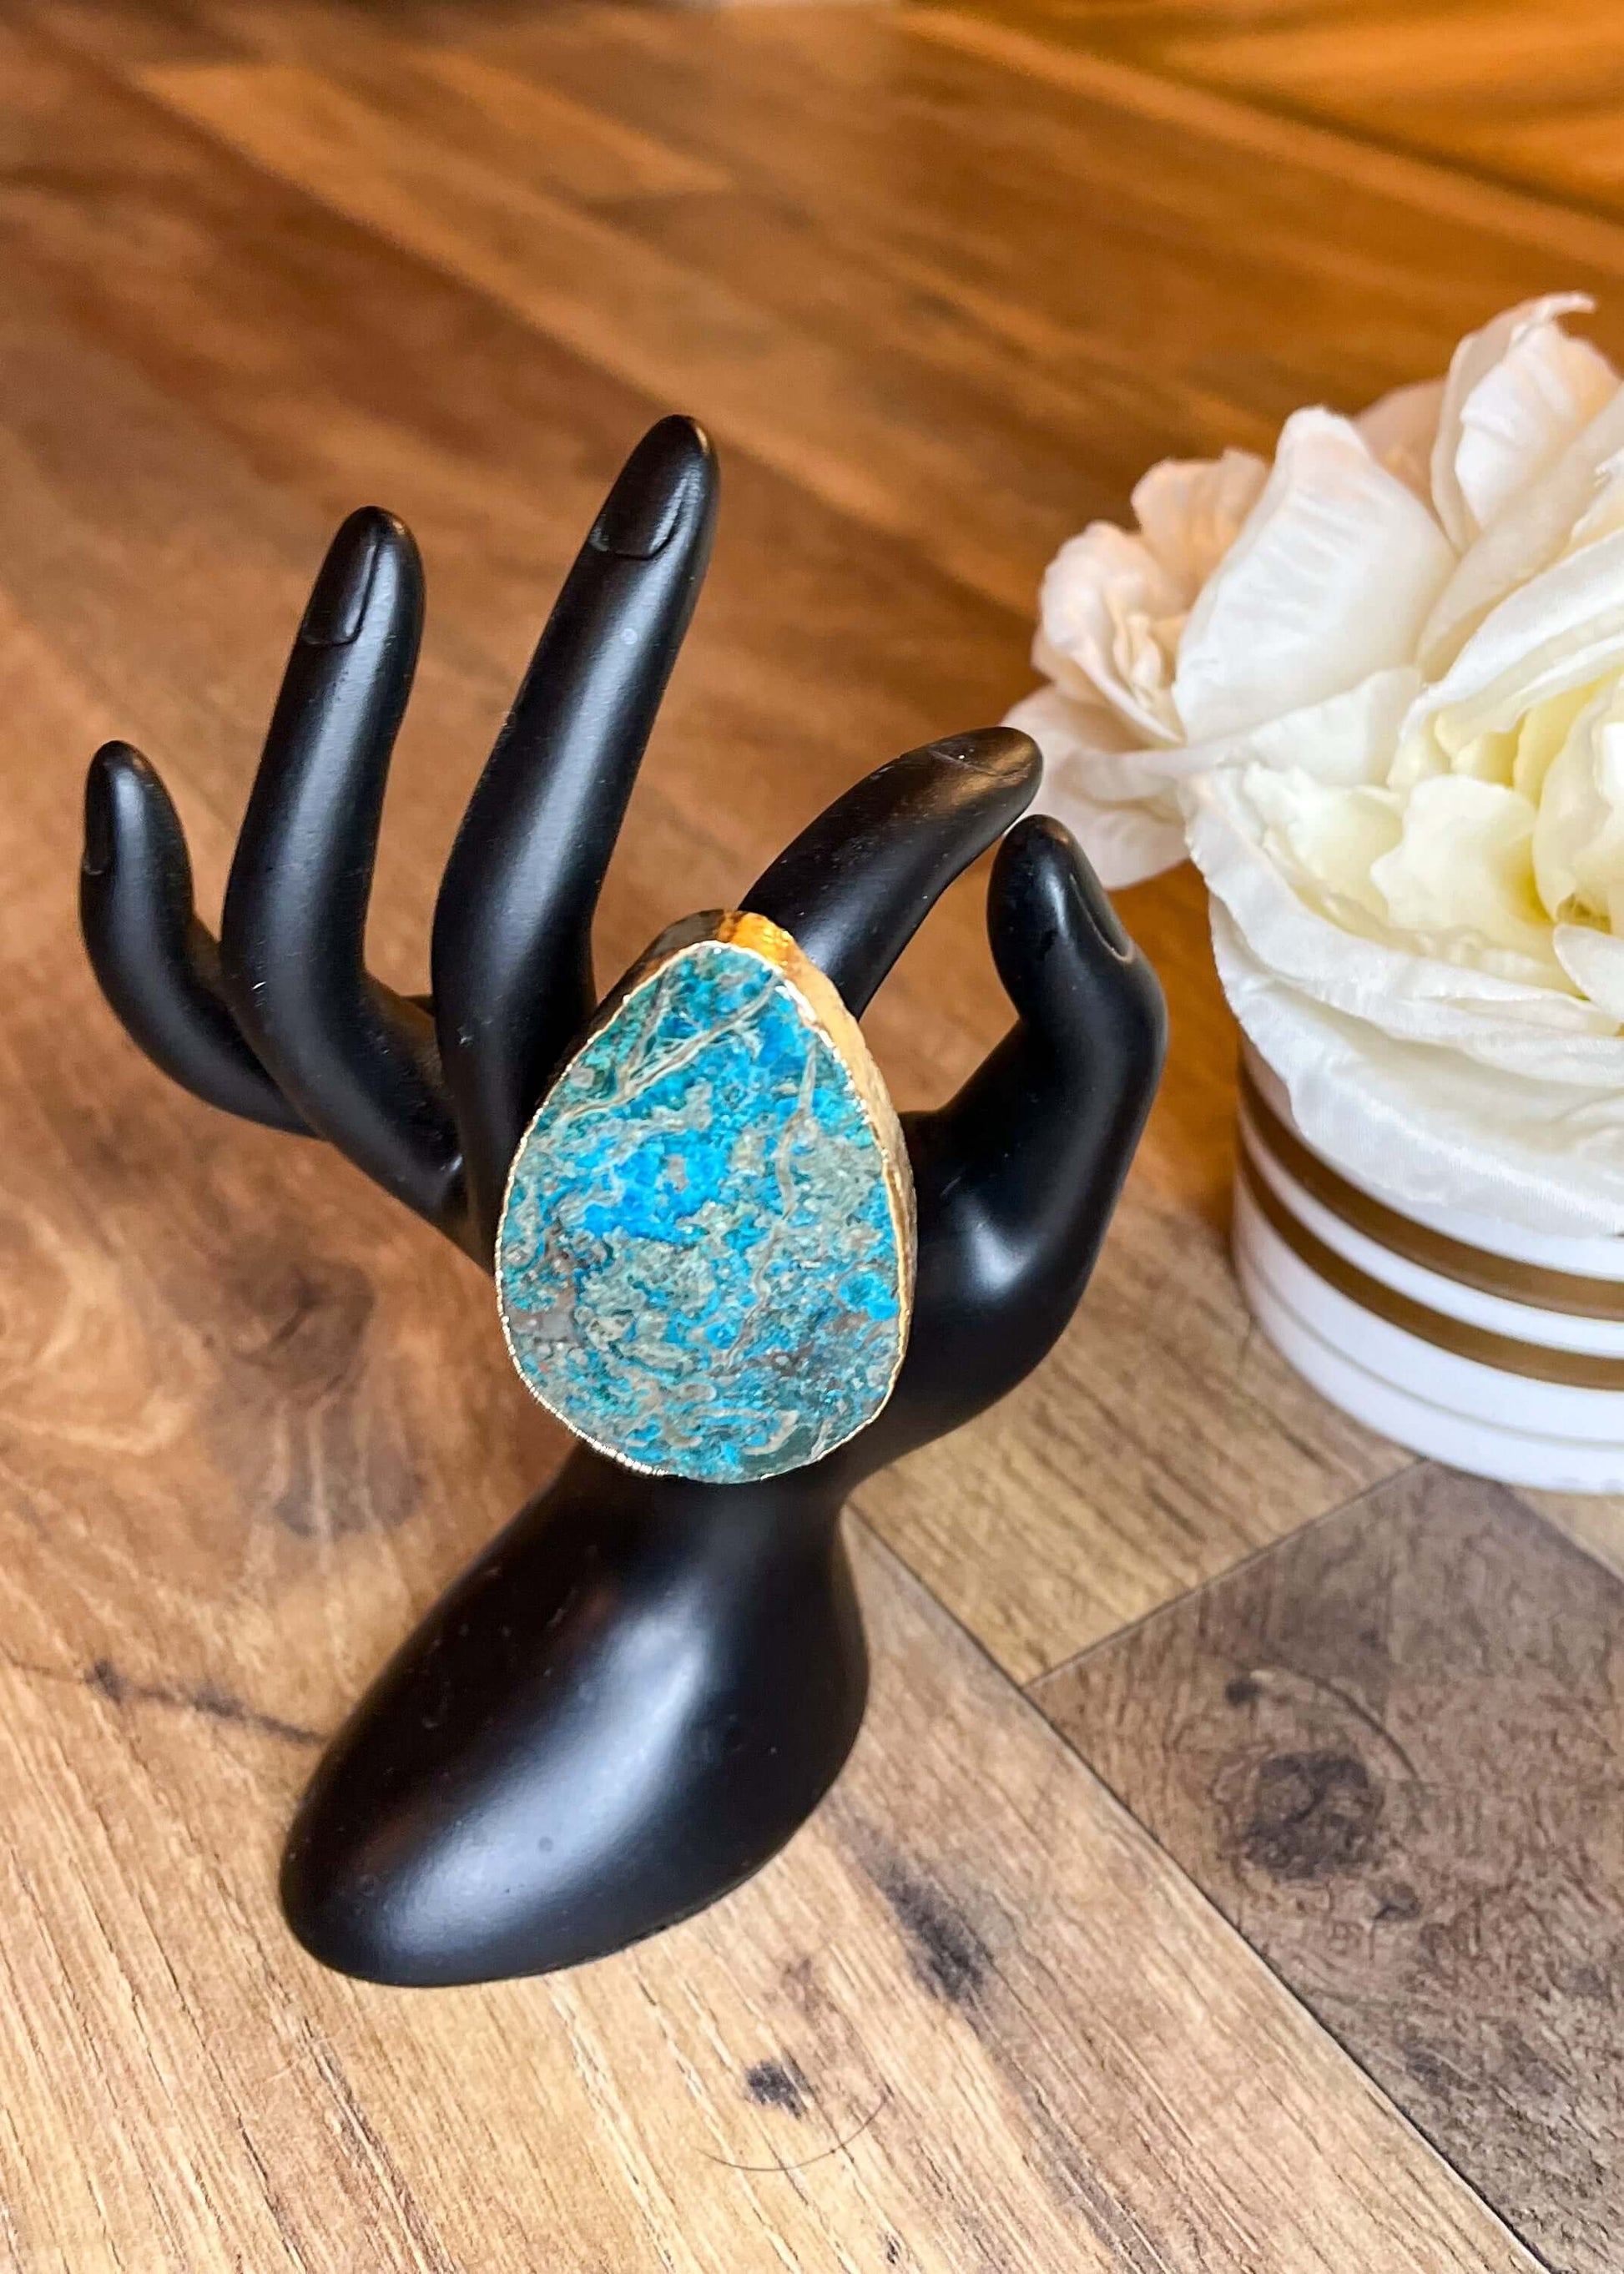 Stunning turquoise stone set in an elegant gold band